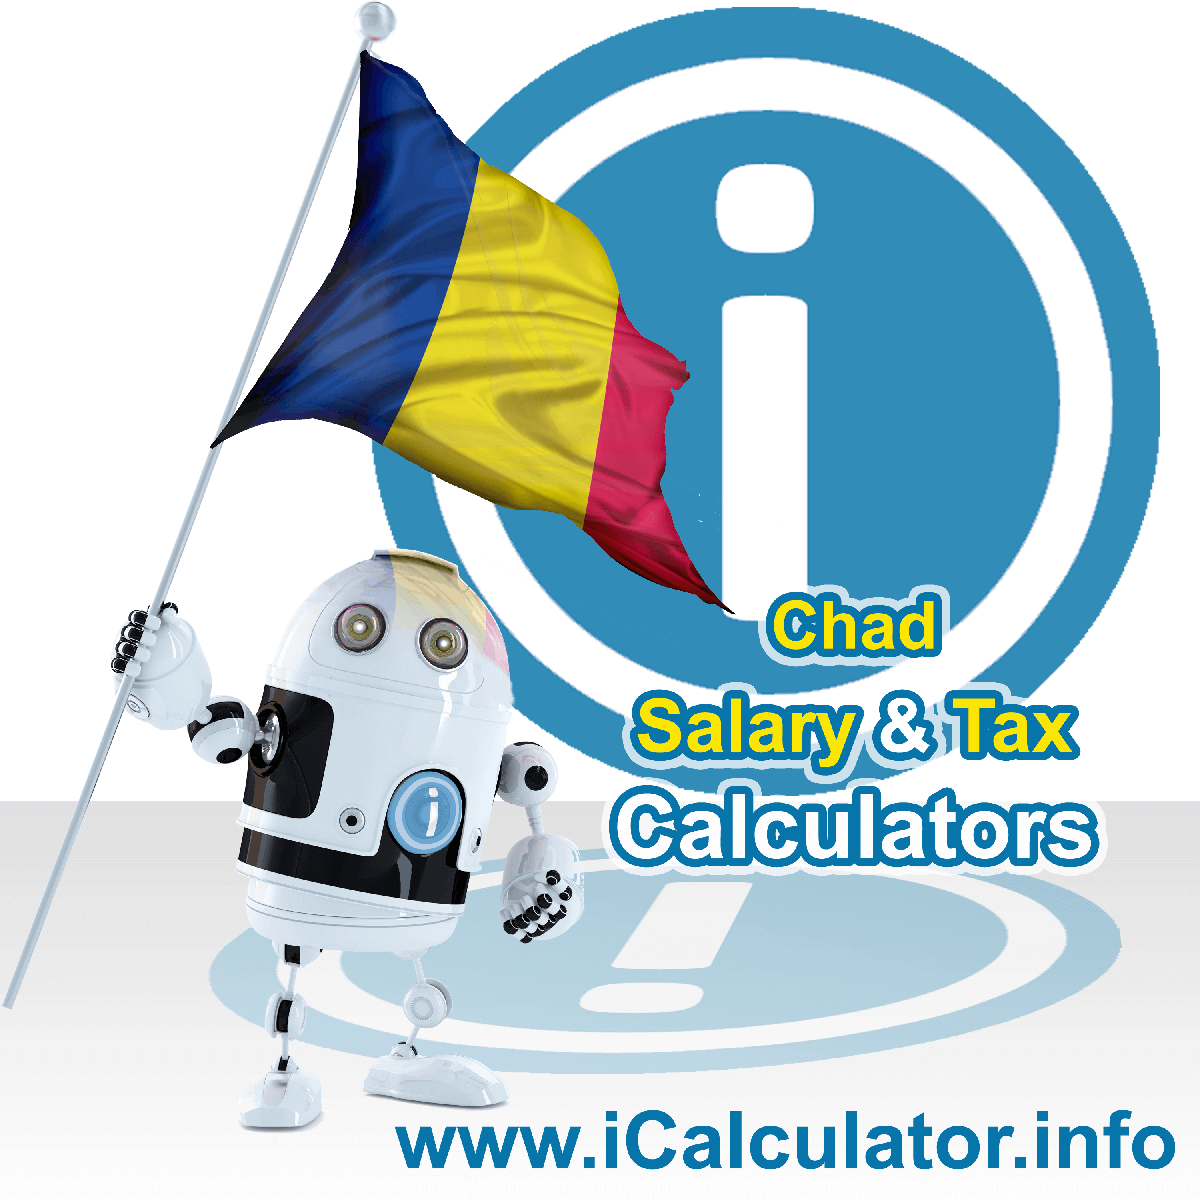 Chad Wage Calculator. This image shows the Chad flag and information relating to the tax formula for the Chad Tax Calculator